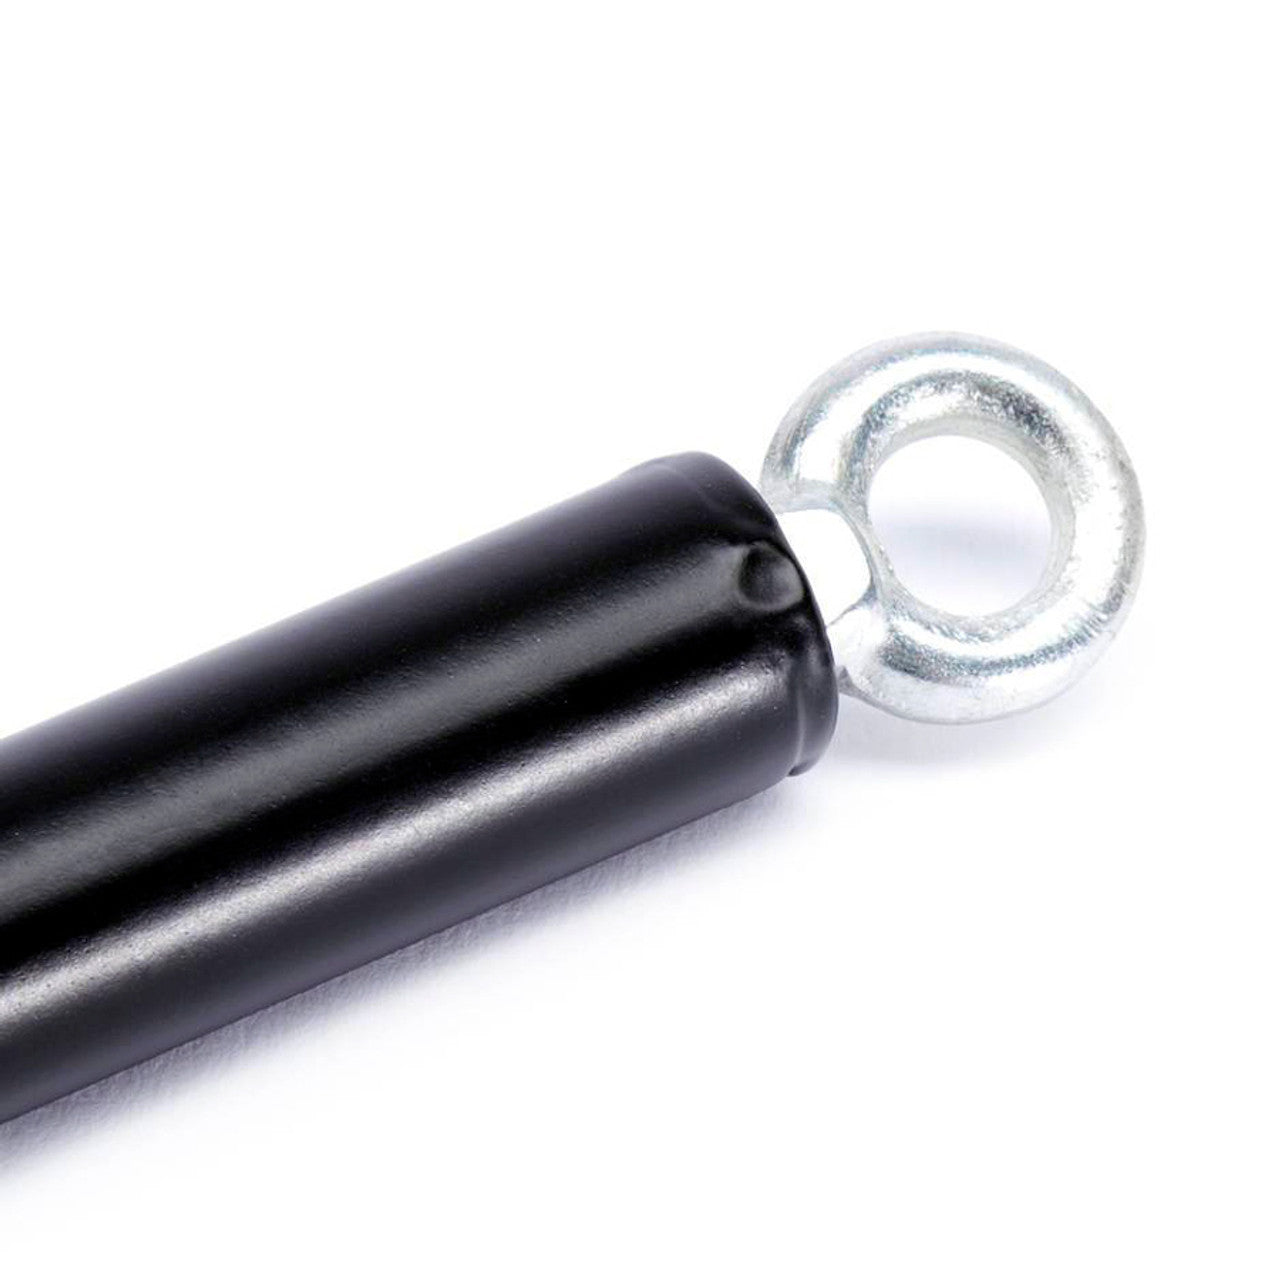 A close up of the o-ring attachment at the end of the black Kink Lab Adjustable Spreader Bar.